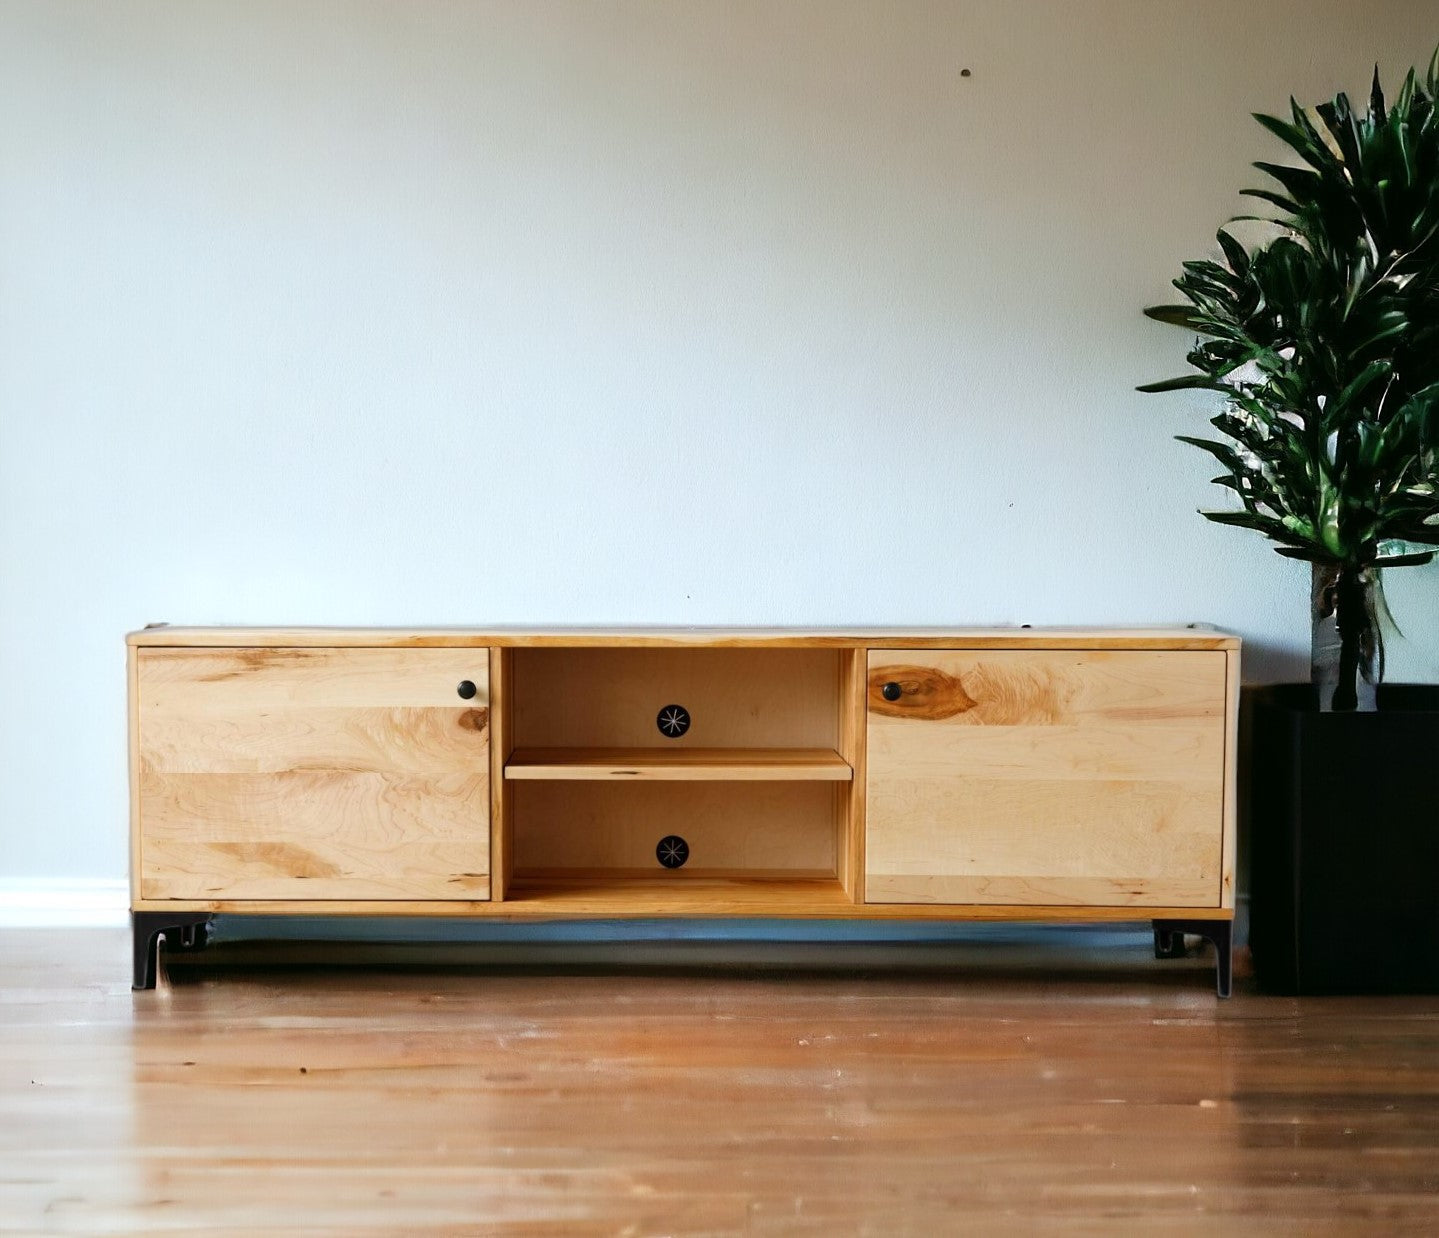 Natural Maple And Black Steel TV Stand Or Media Center